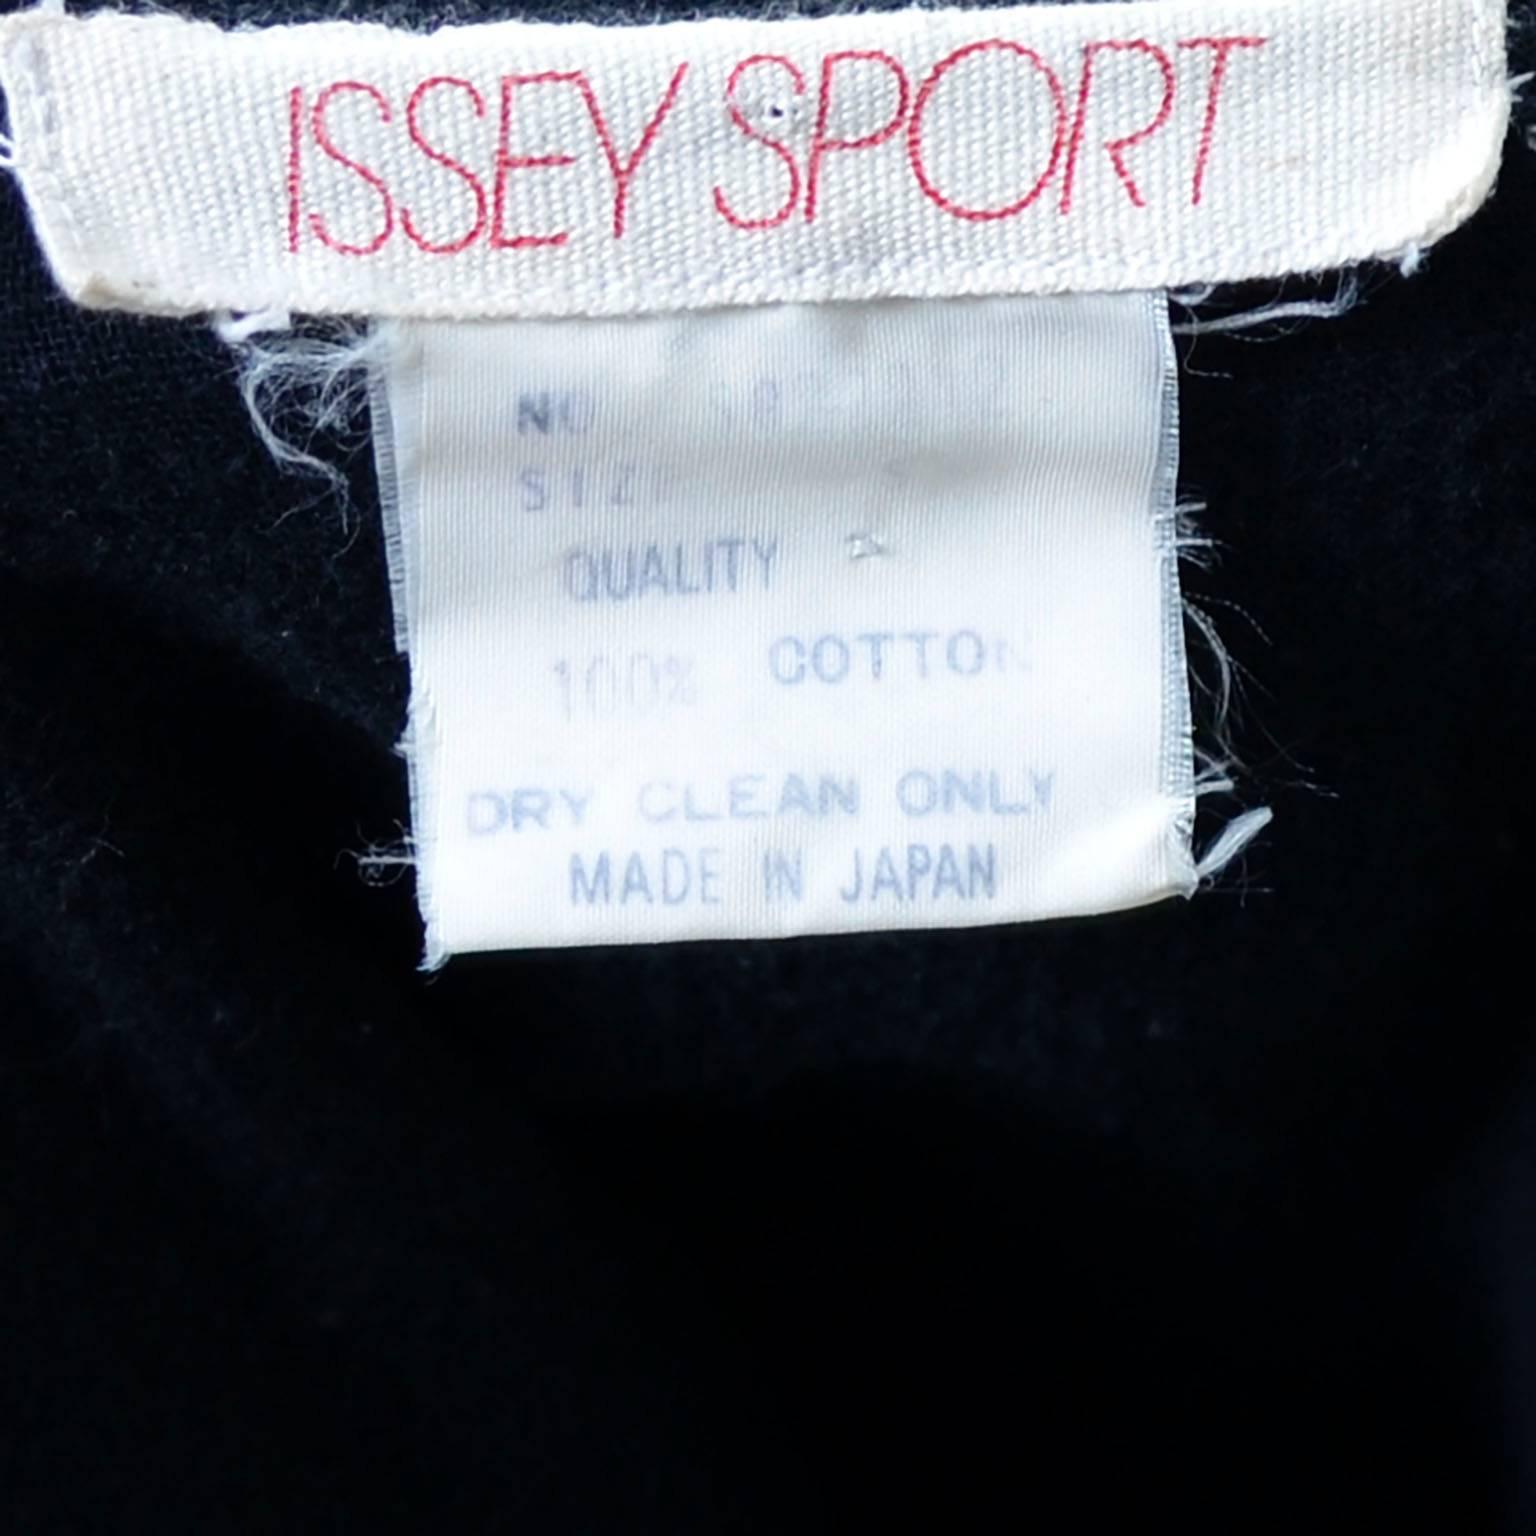 Issey Miyake Sport 1980s Cotton Dress or Tunic Made in Japan Minimalist Chic 2